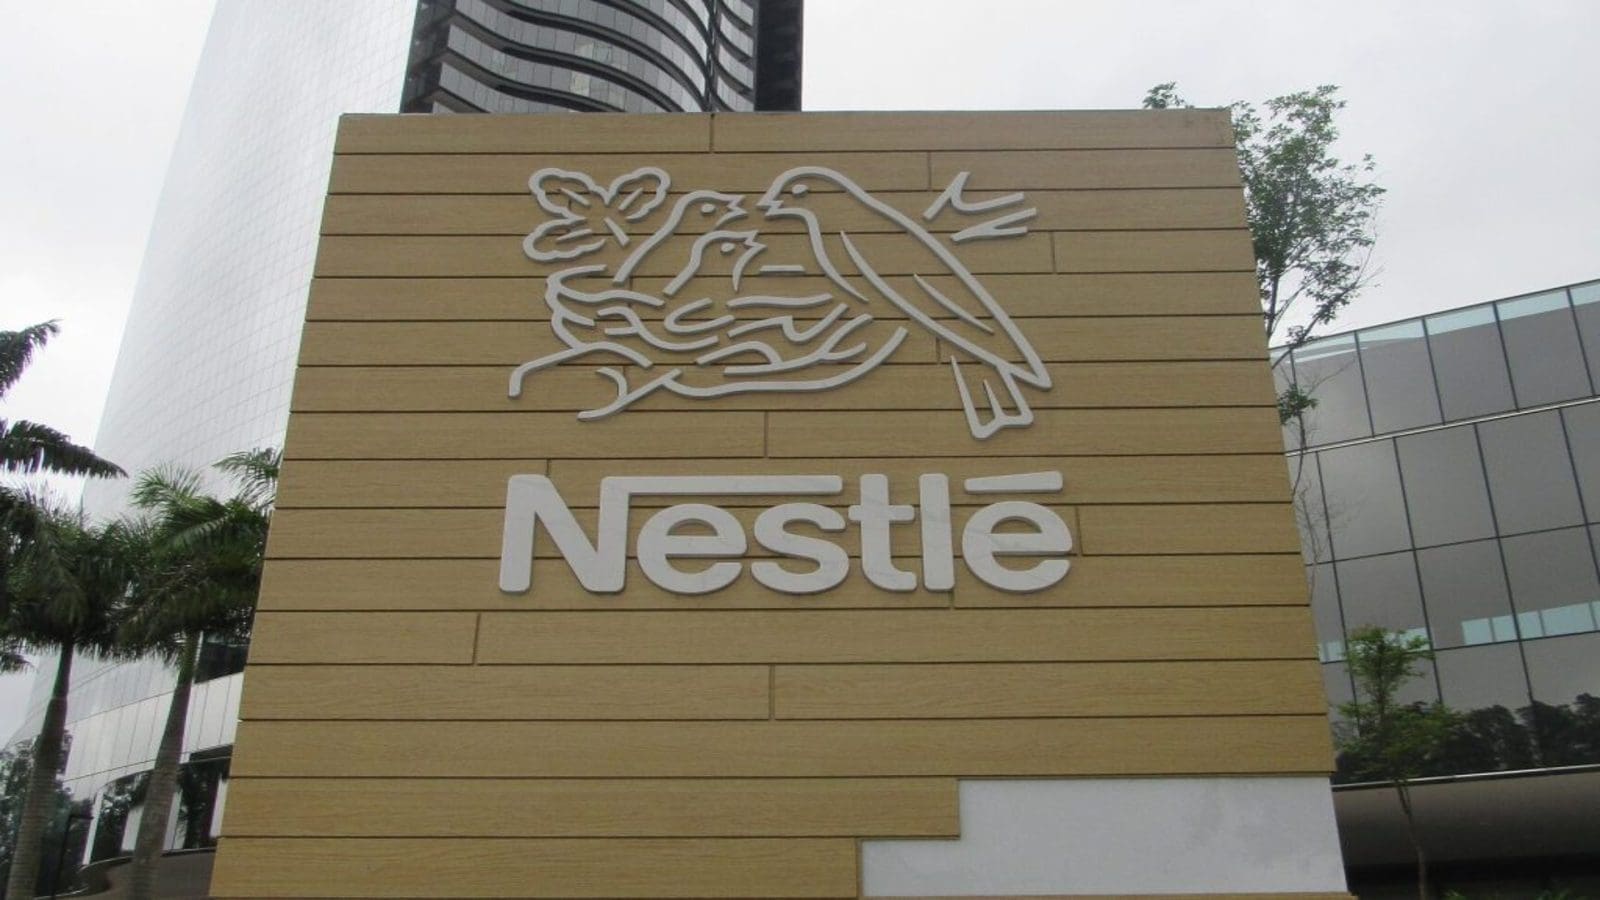 Nestlé sets ambitious target to promote nutritious foods, support balanced diets